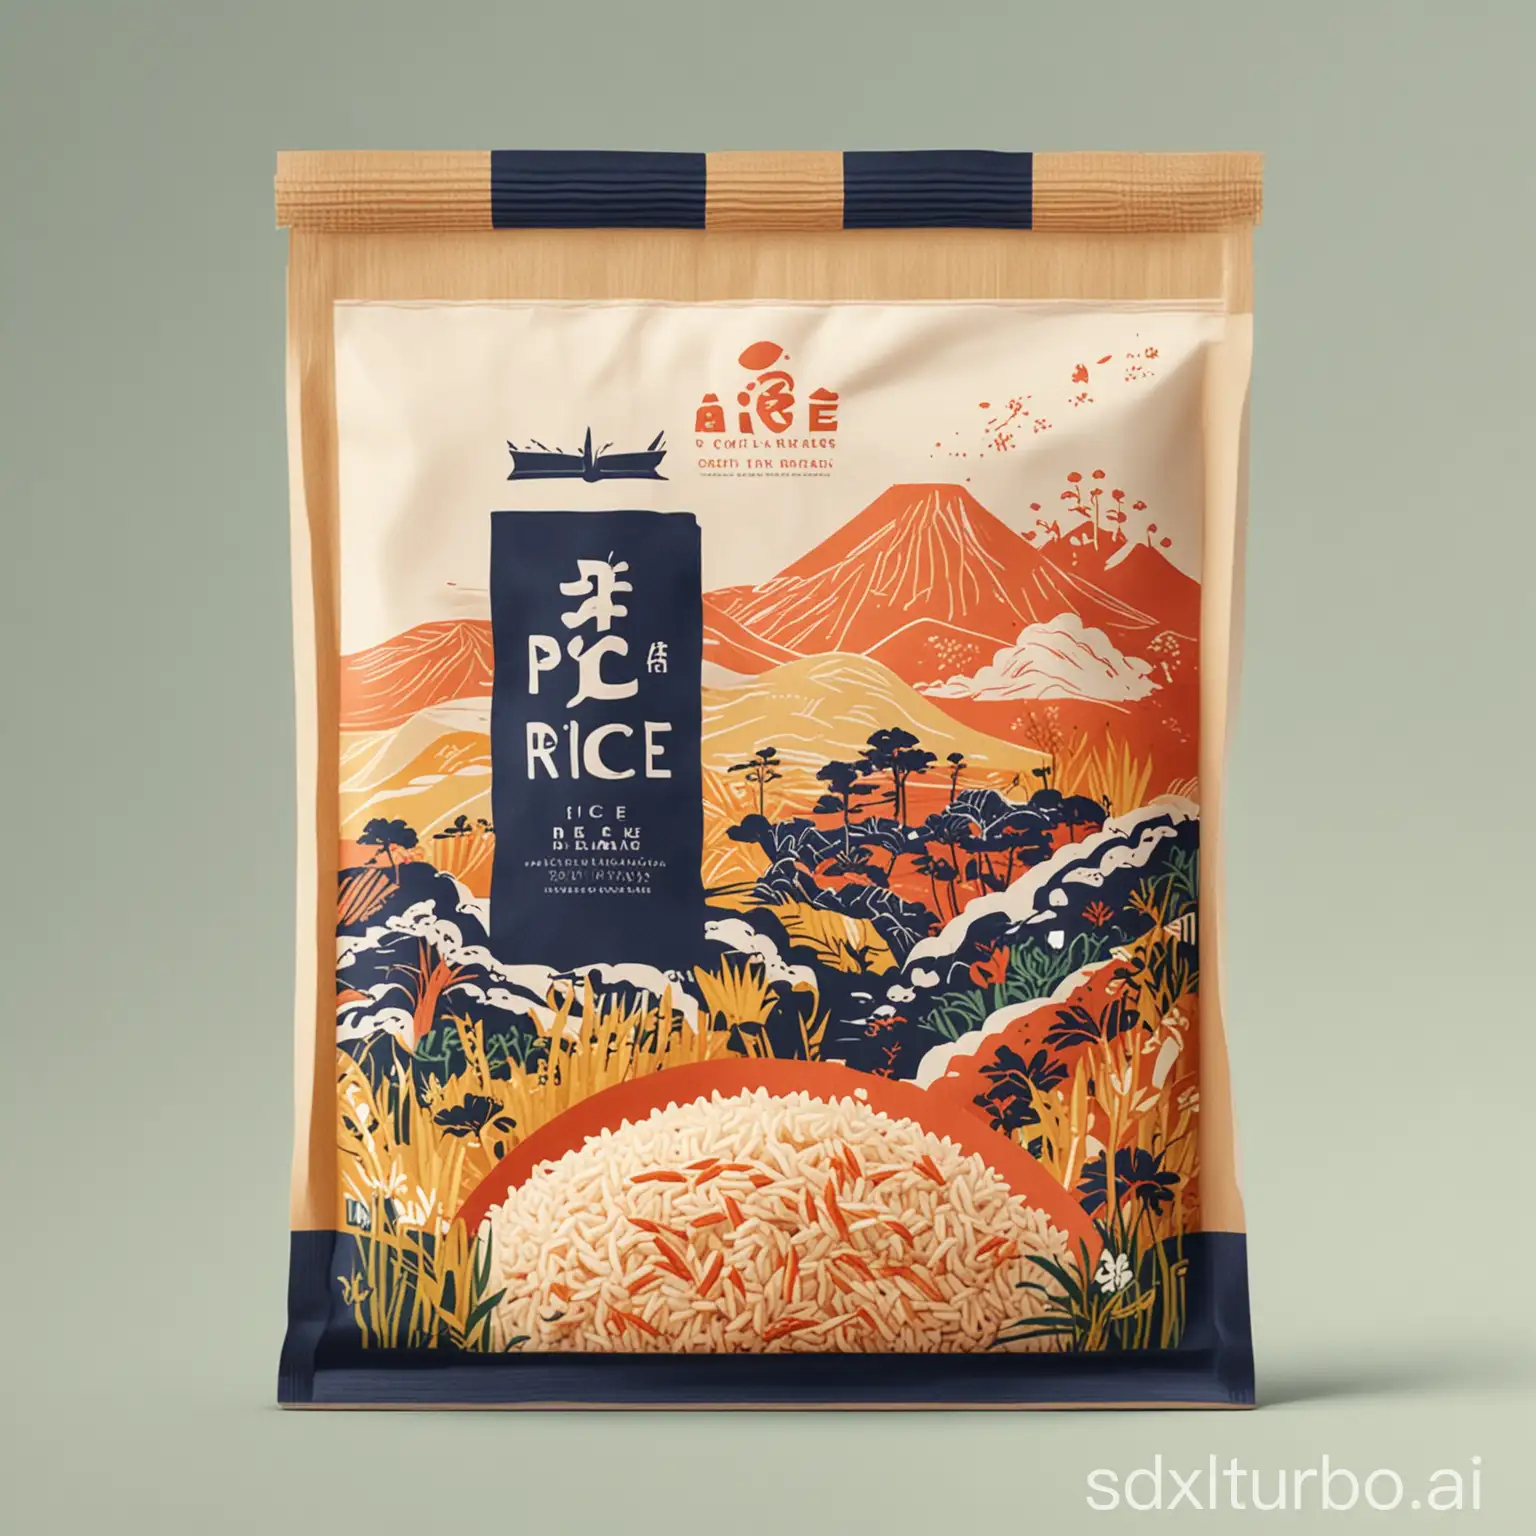 rice packaging design illustration, flat style, modern, vibrant with personality